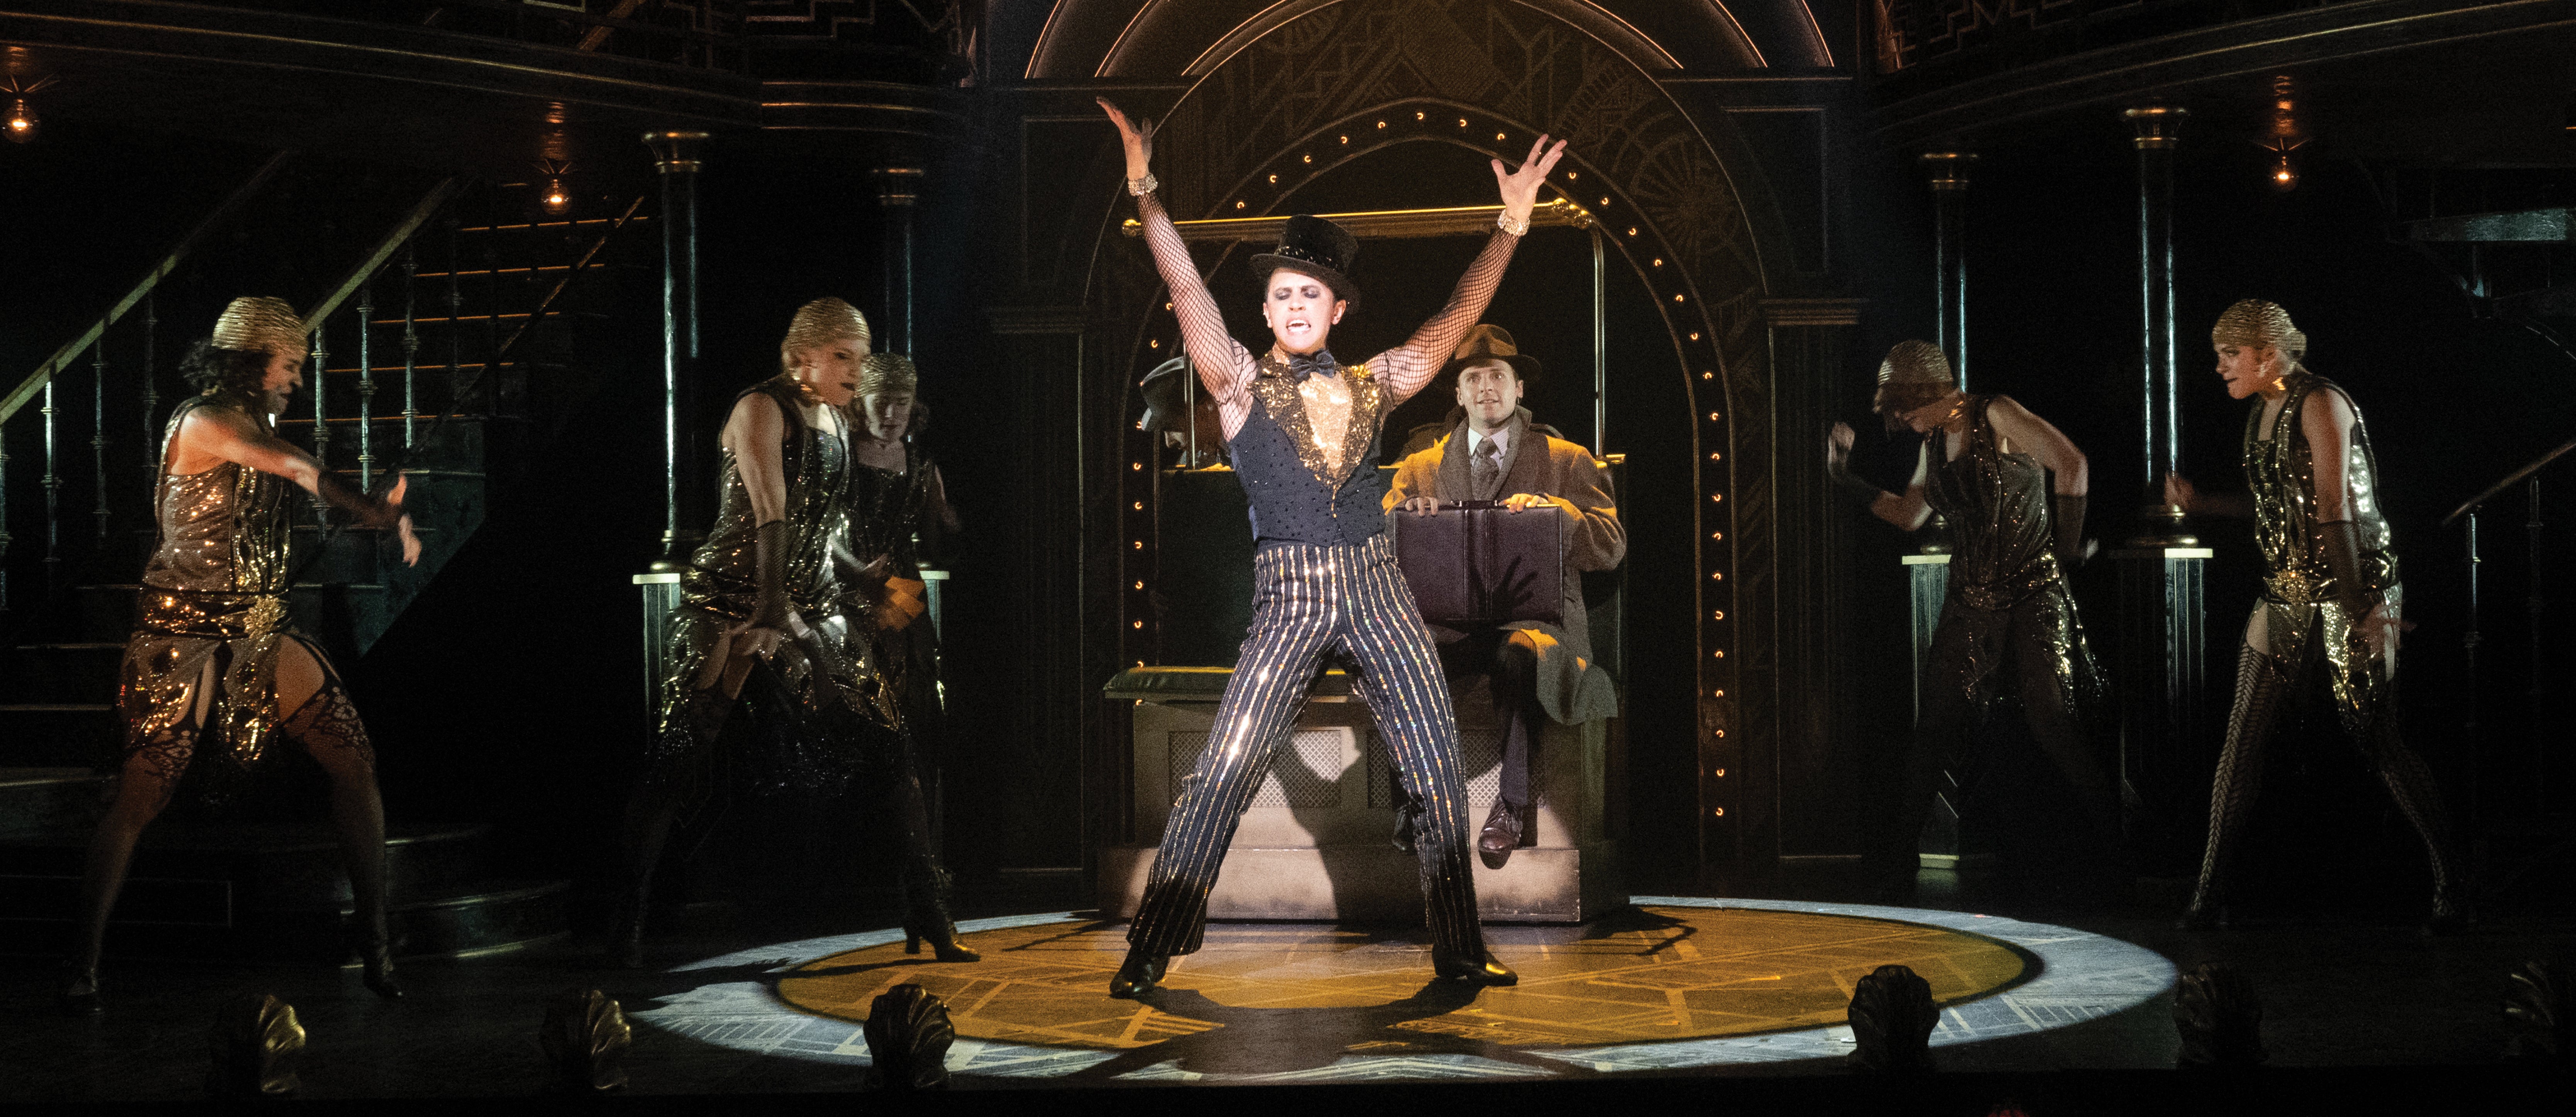 Cats Musical in Broadway NYC: everything you need to know about the show -  Hellotickets